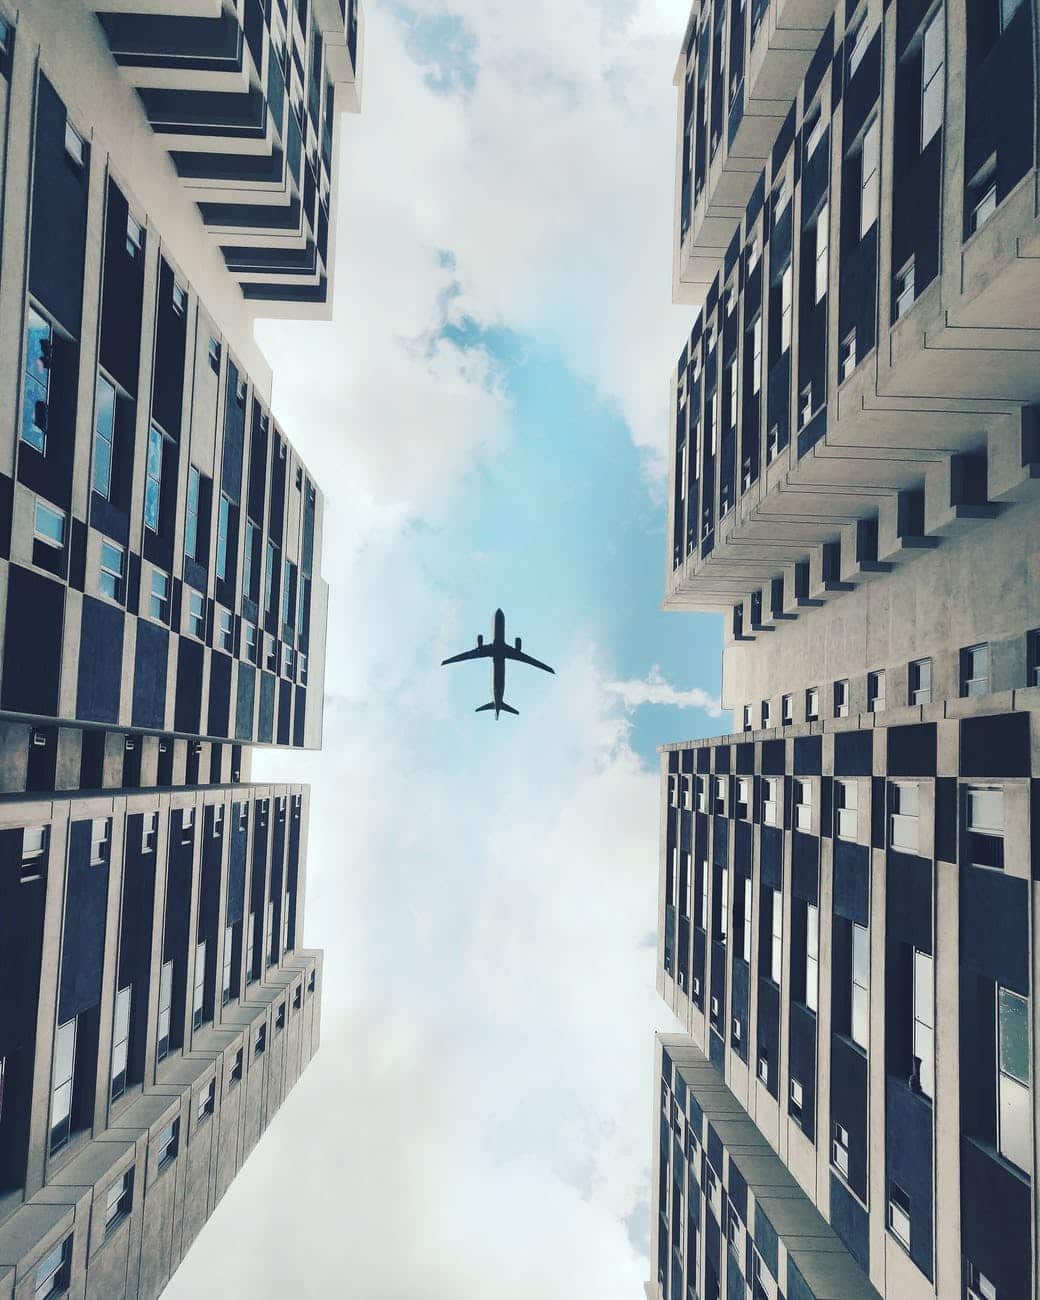 low angle photo of airplane flying